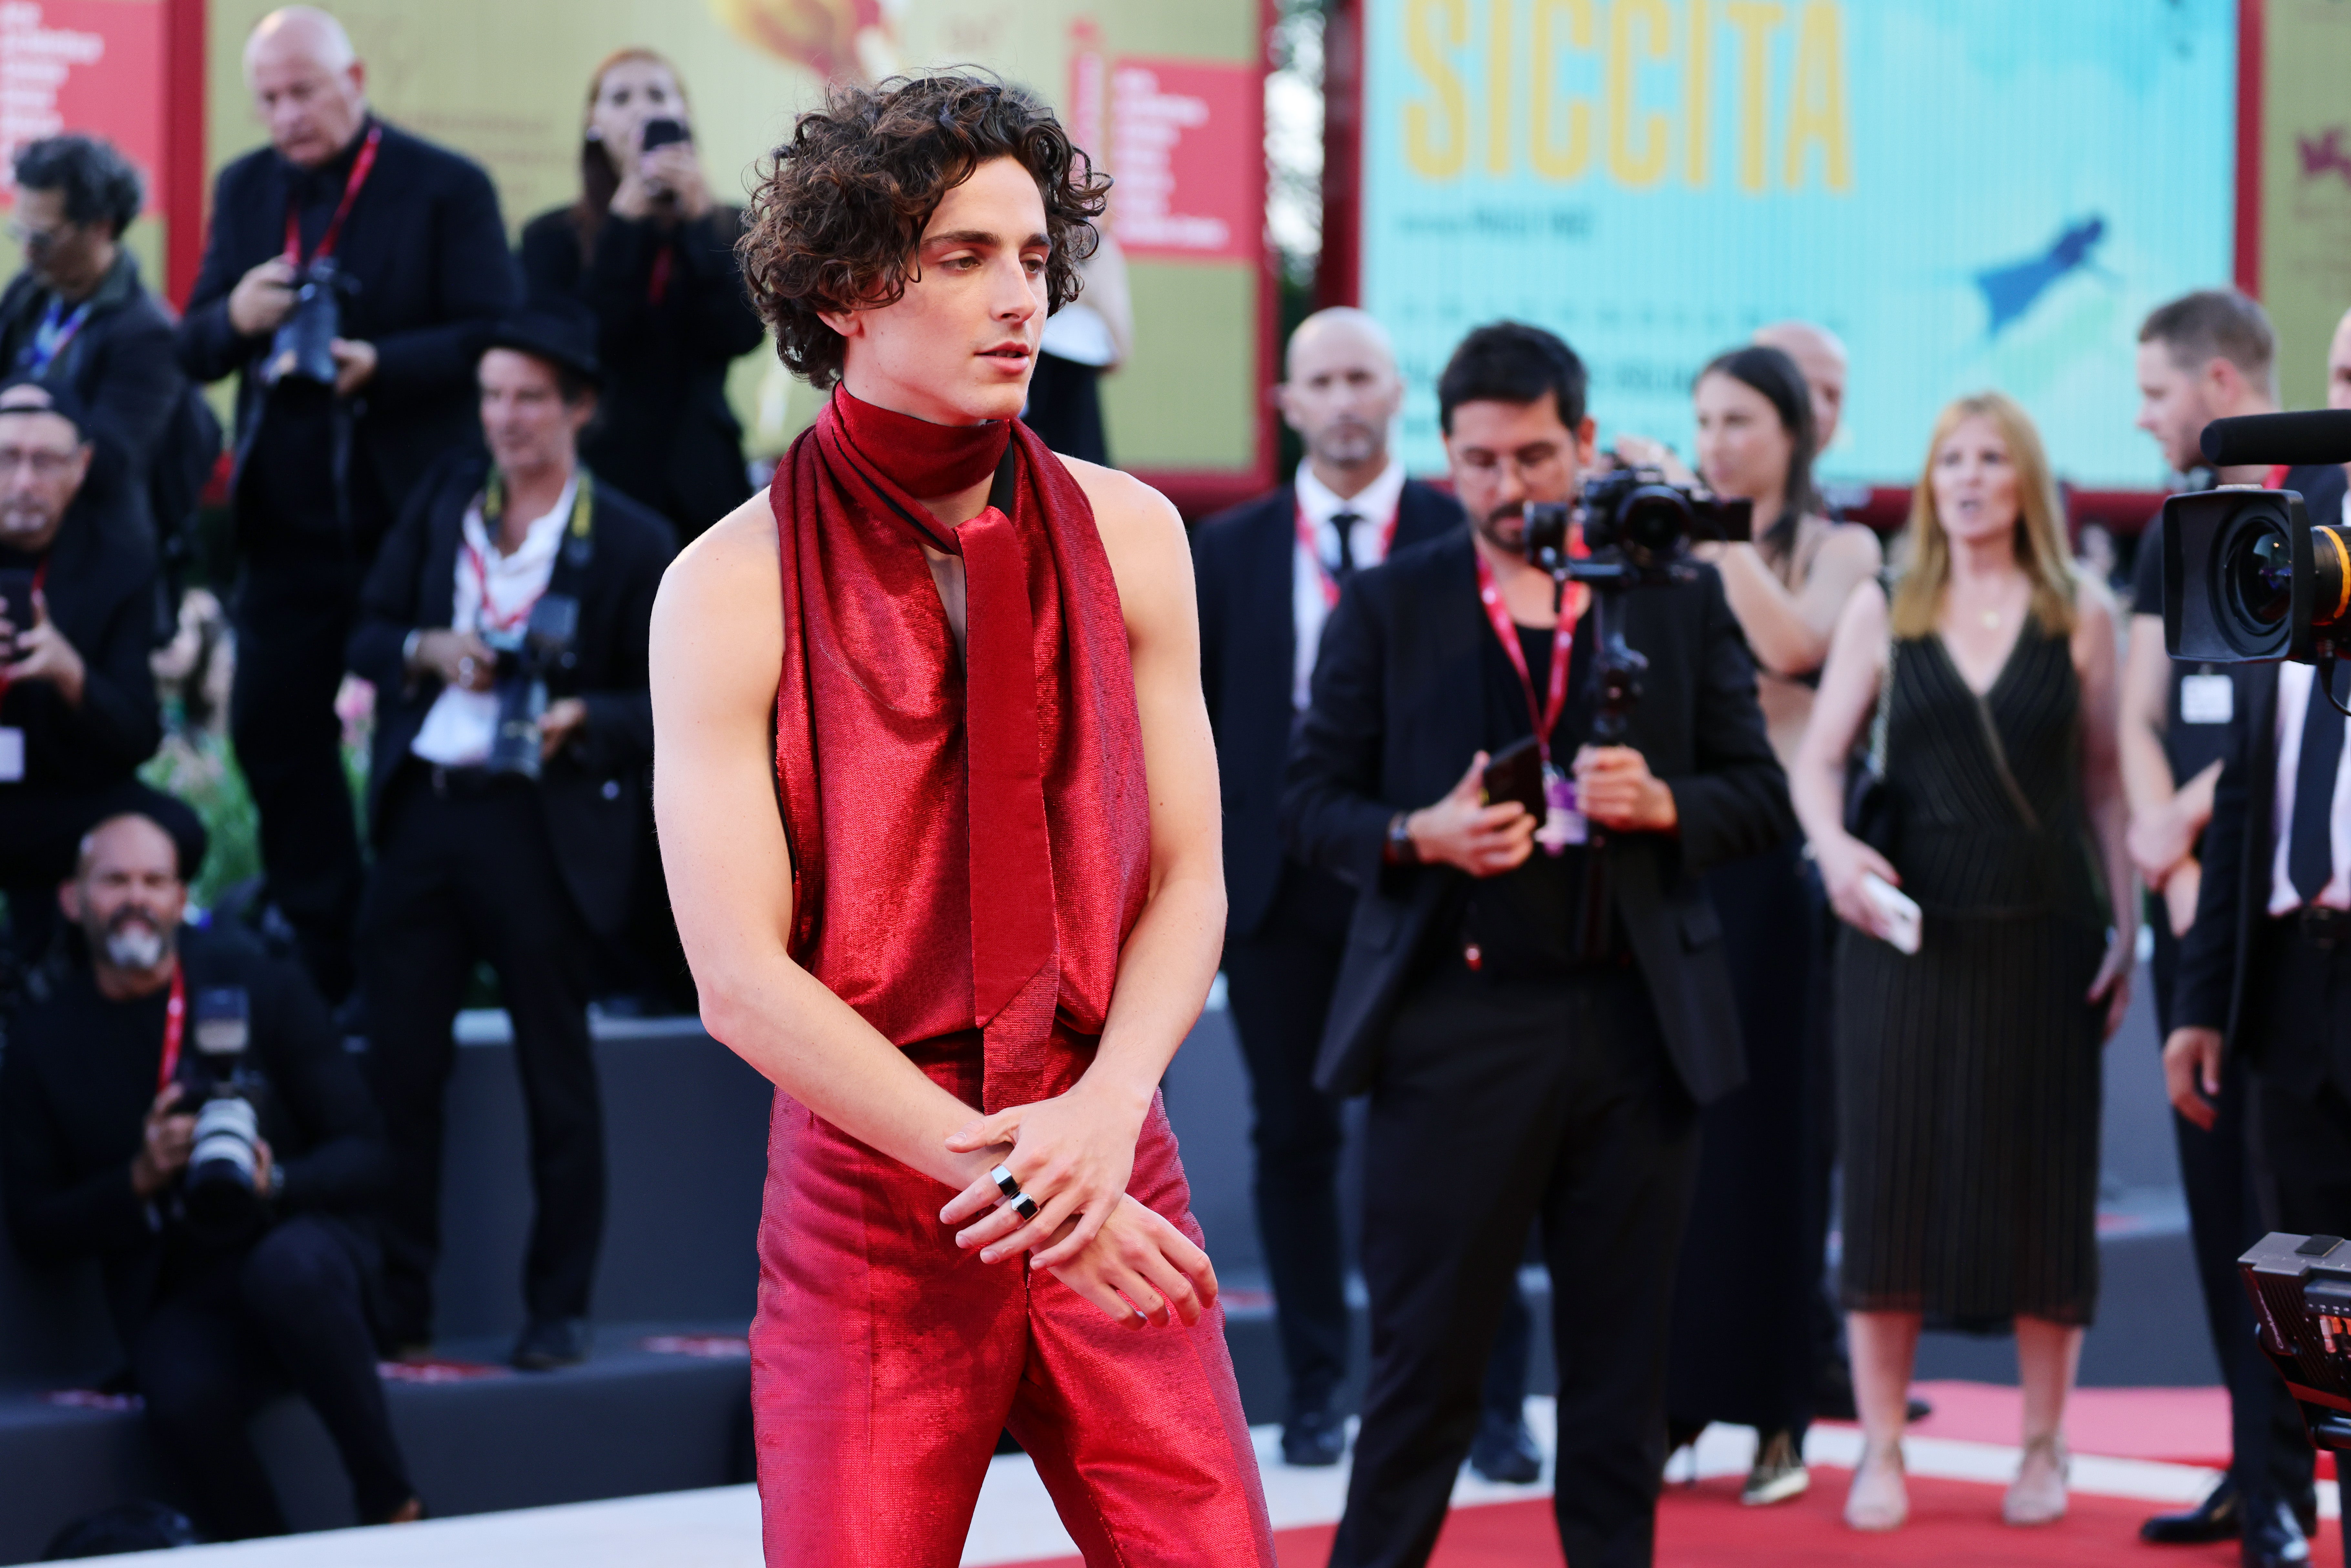 Timothee Chalamet attends the "Bones And All" red carpet at the 79th Venice International Film Festival